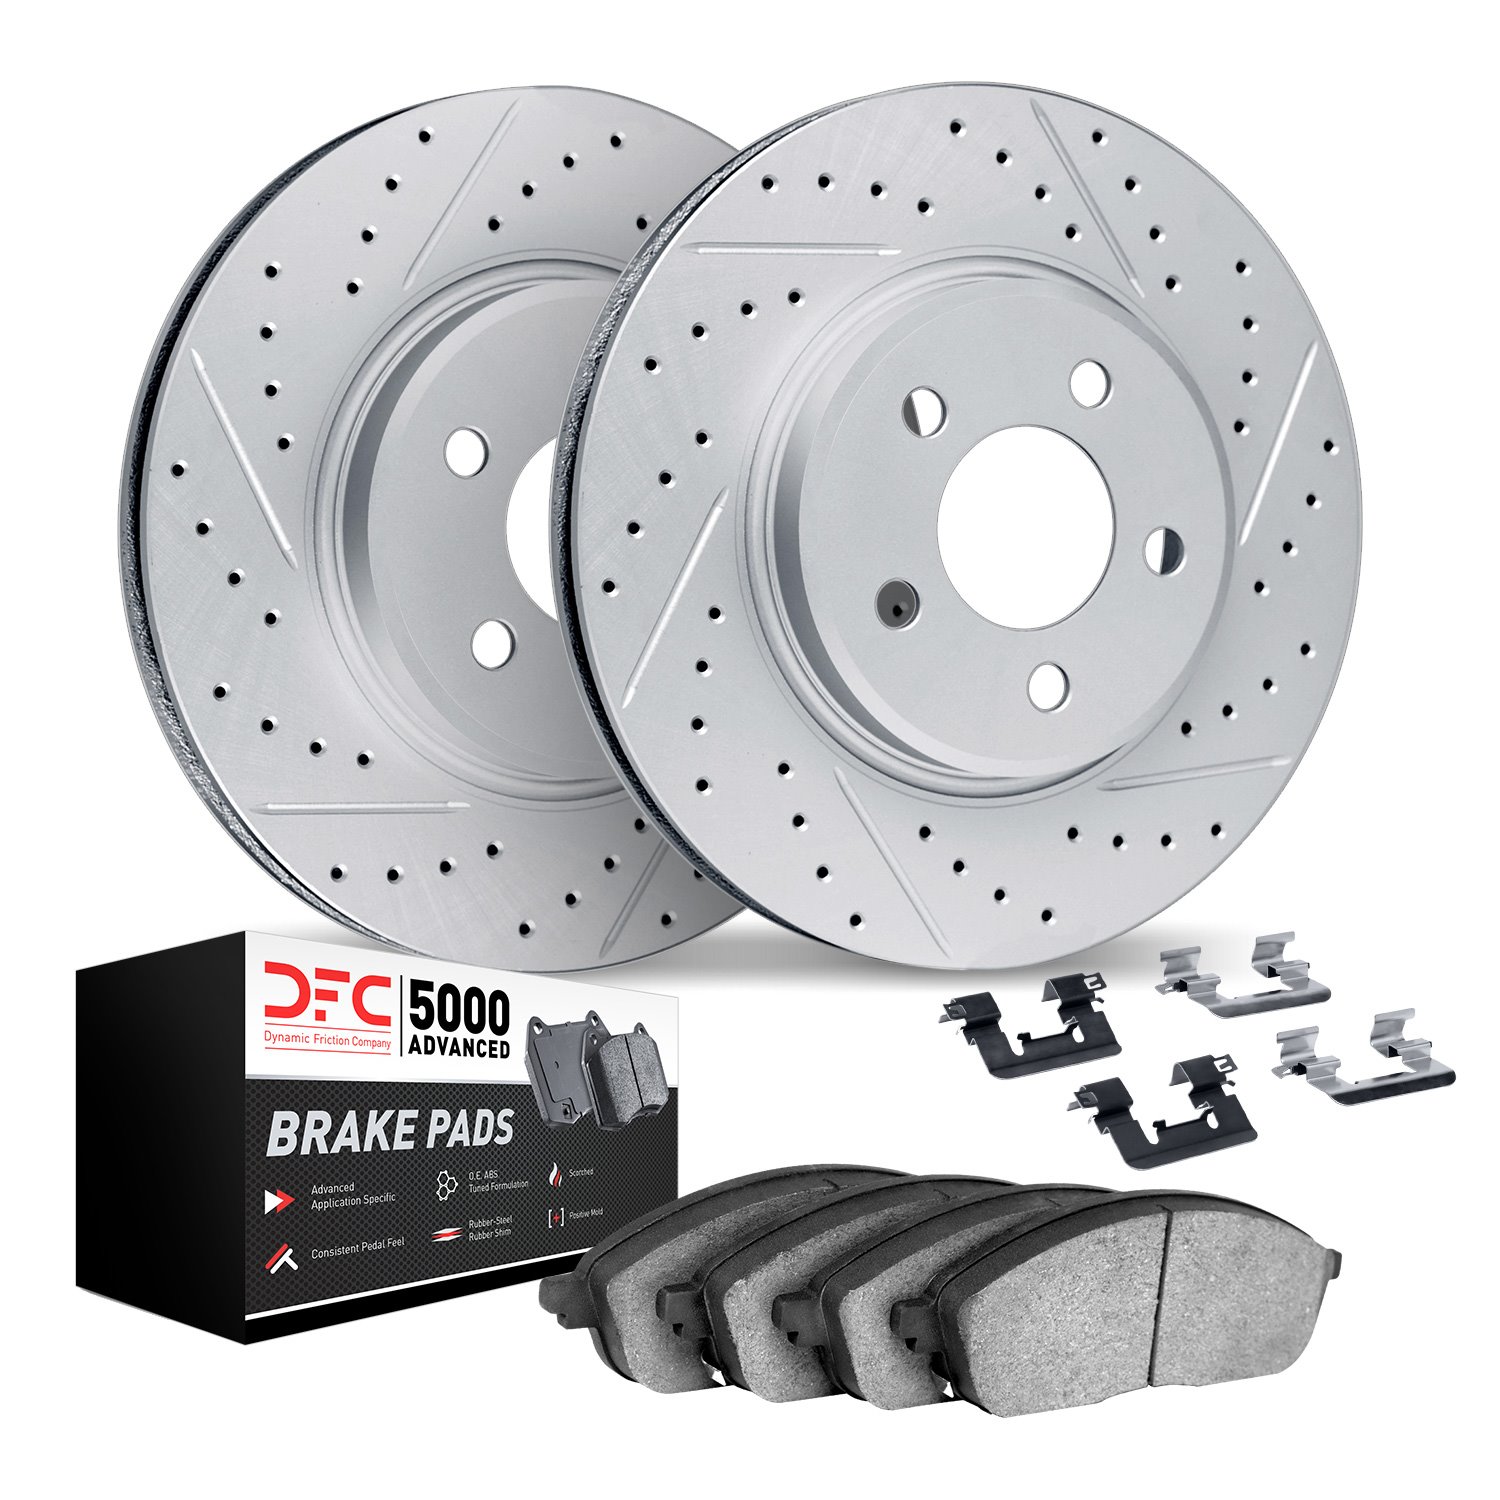 2512-58027 Geoperformance Drilled/Slotted Rotors w/5000 Advanced Brake Pads Kit & Hardware, 2013-2018 Acura/Honda, Position: Fro